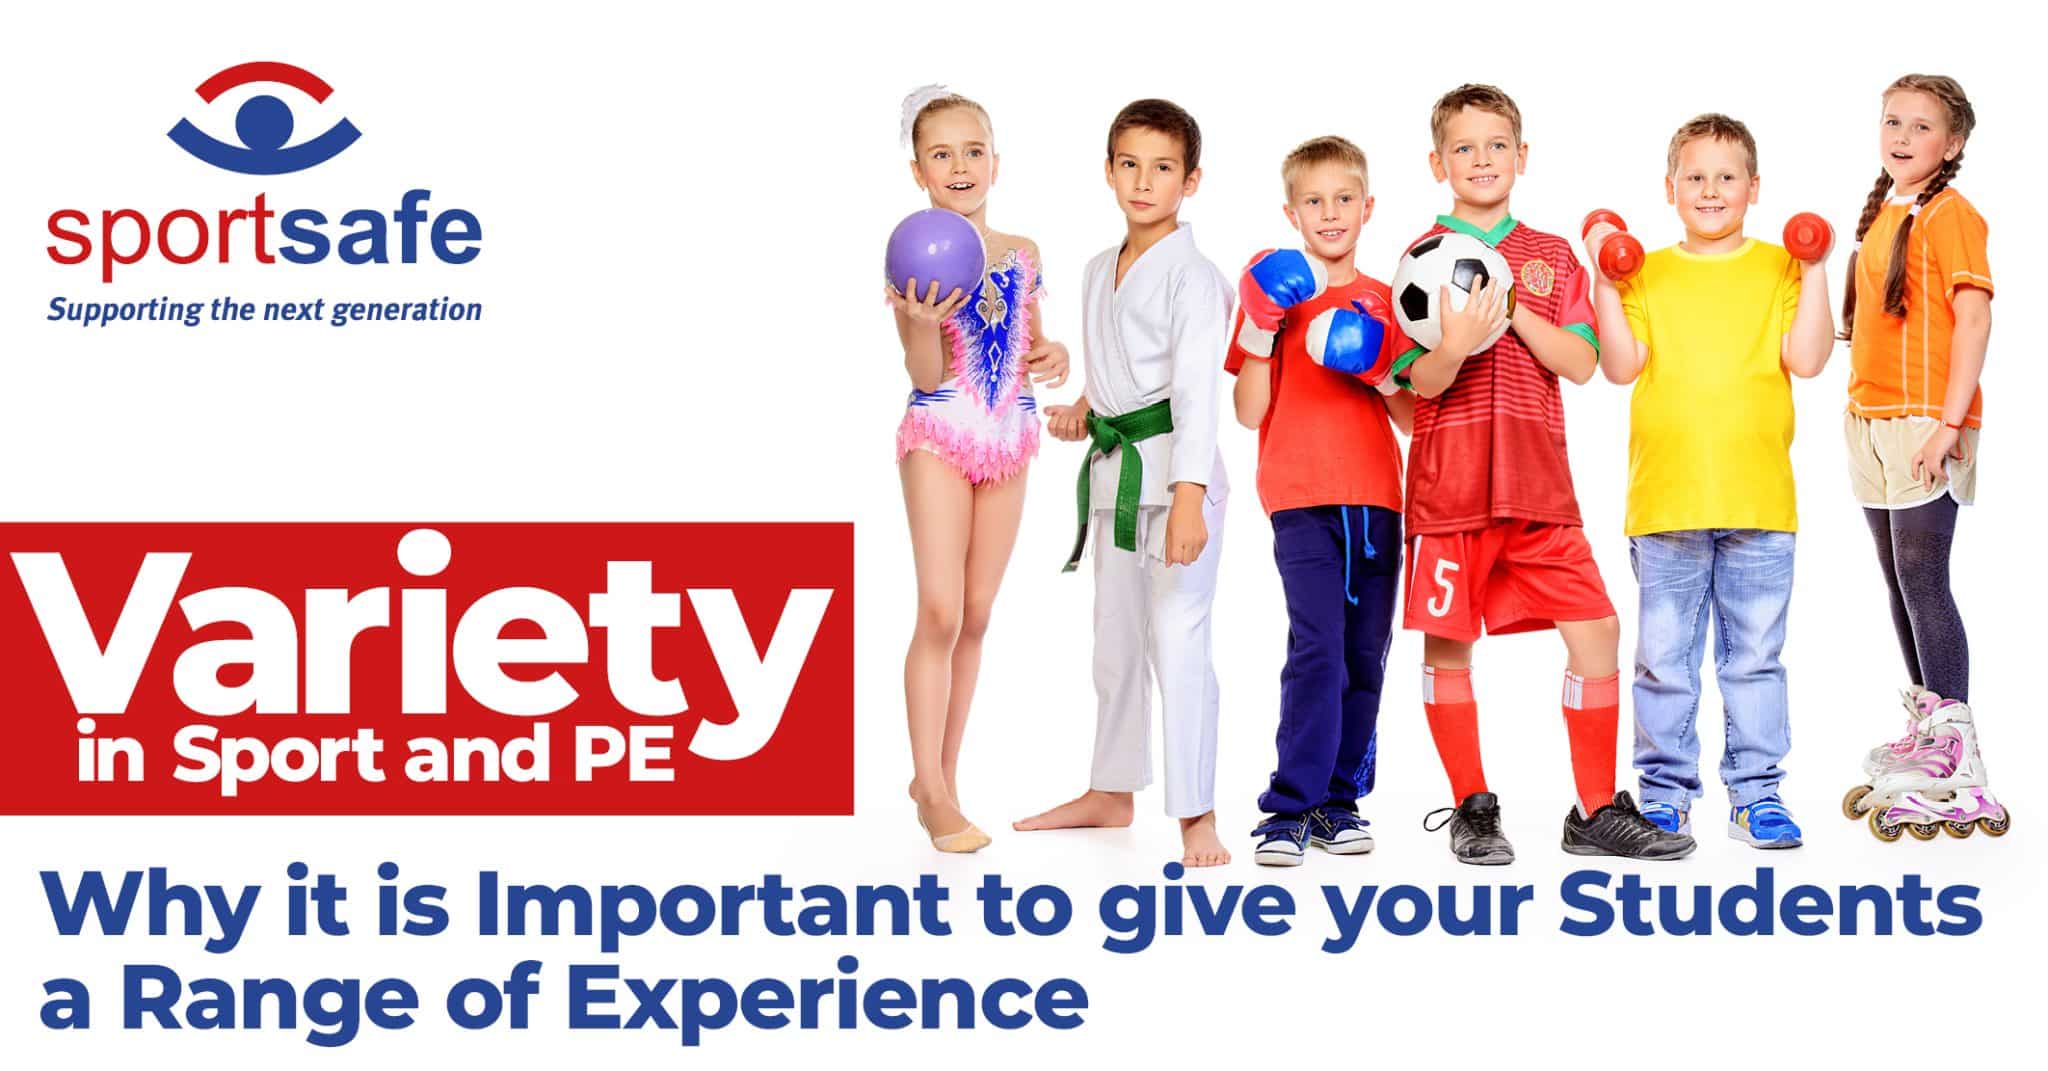 Variety in Sport and PE Why it is Important to give your Students a Range of Experience